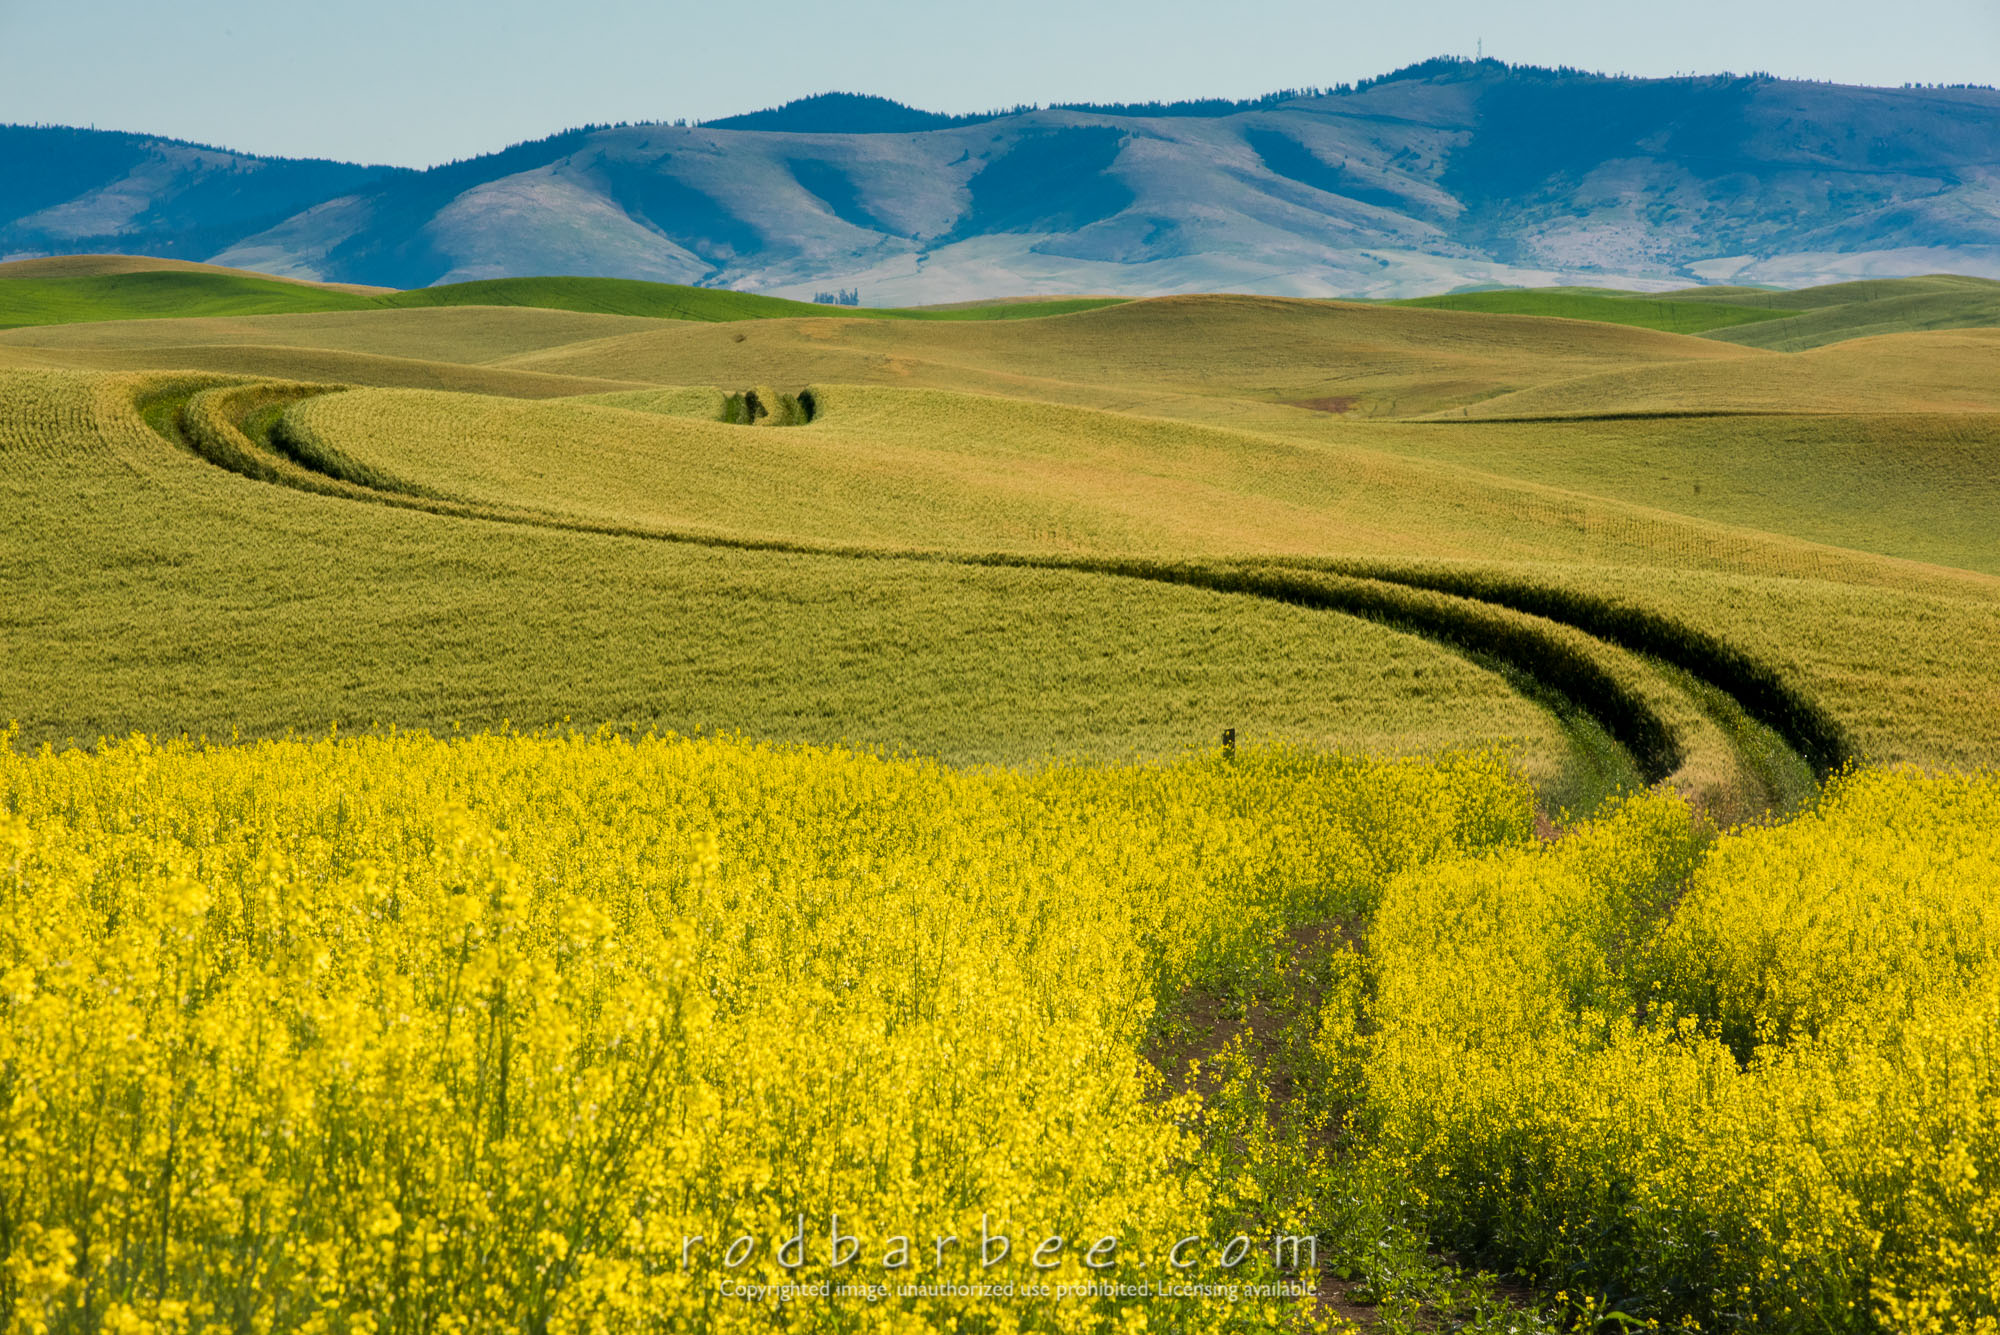 Barbee_160626_5281 |  Tractor path through field of canola, Oaksdale, WA